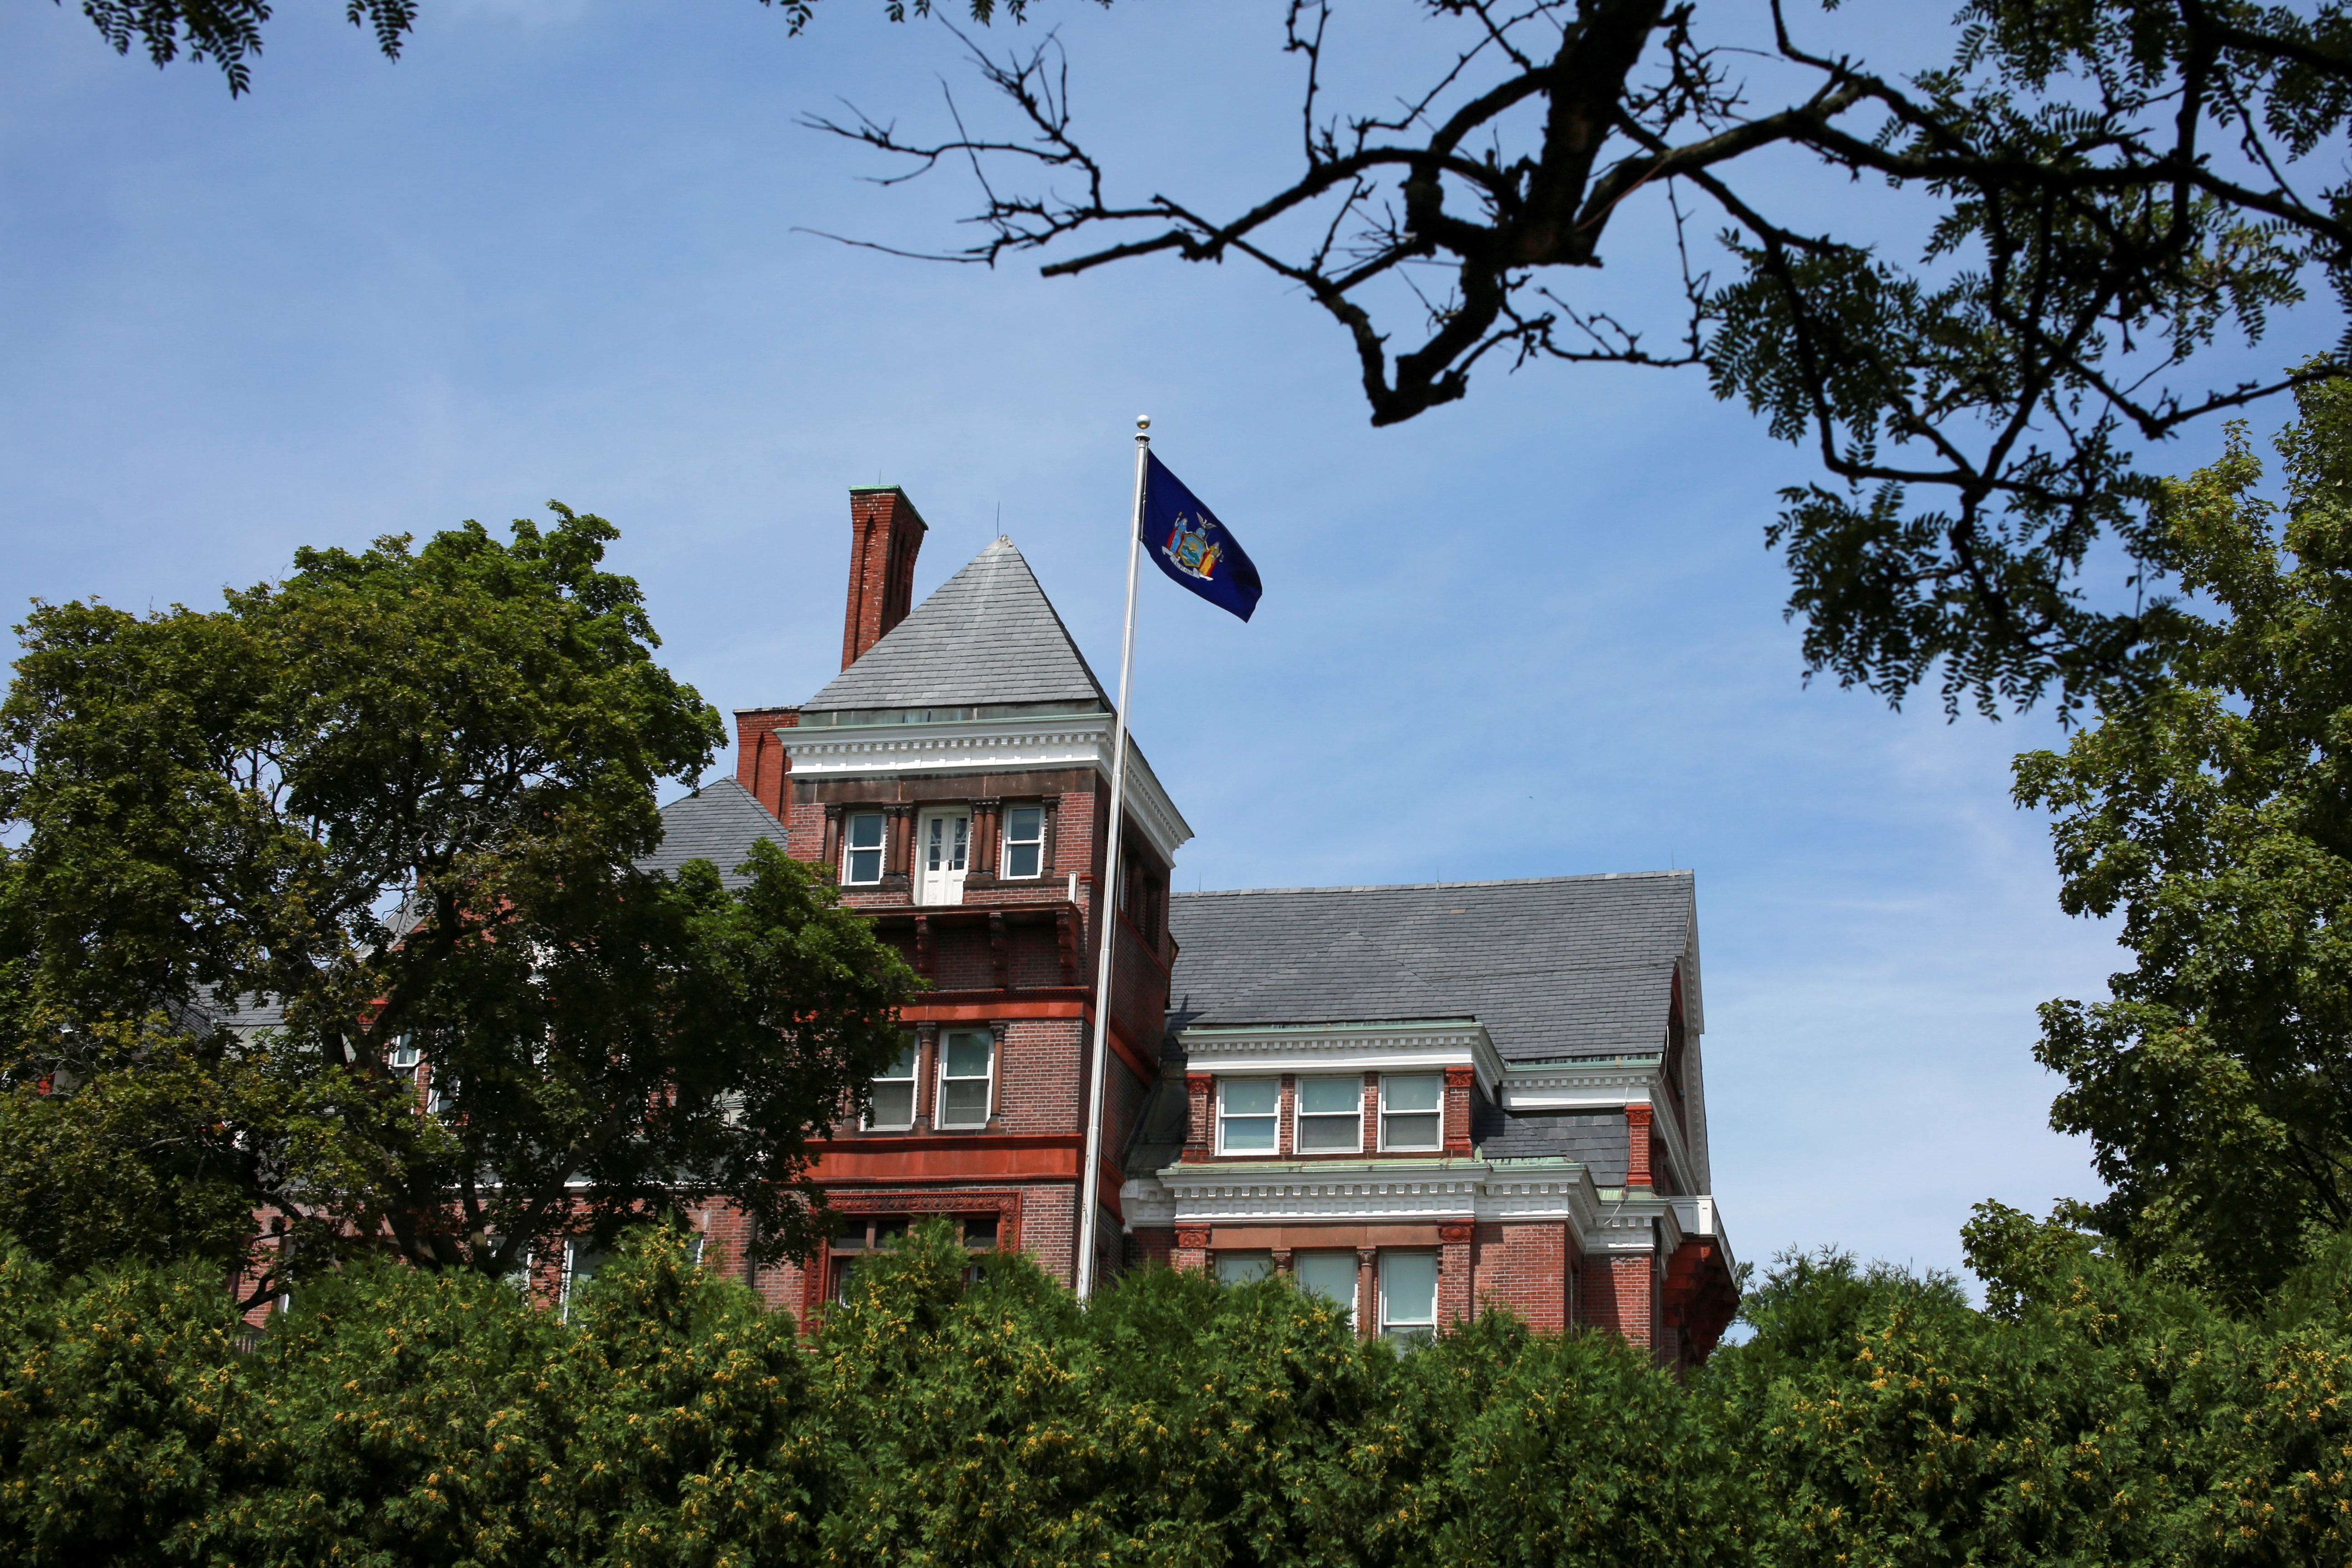 The New York State Governor's Mansion is seen in Albany, New York